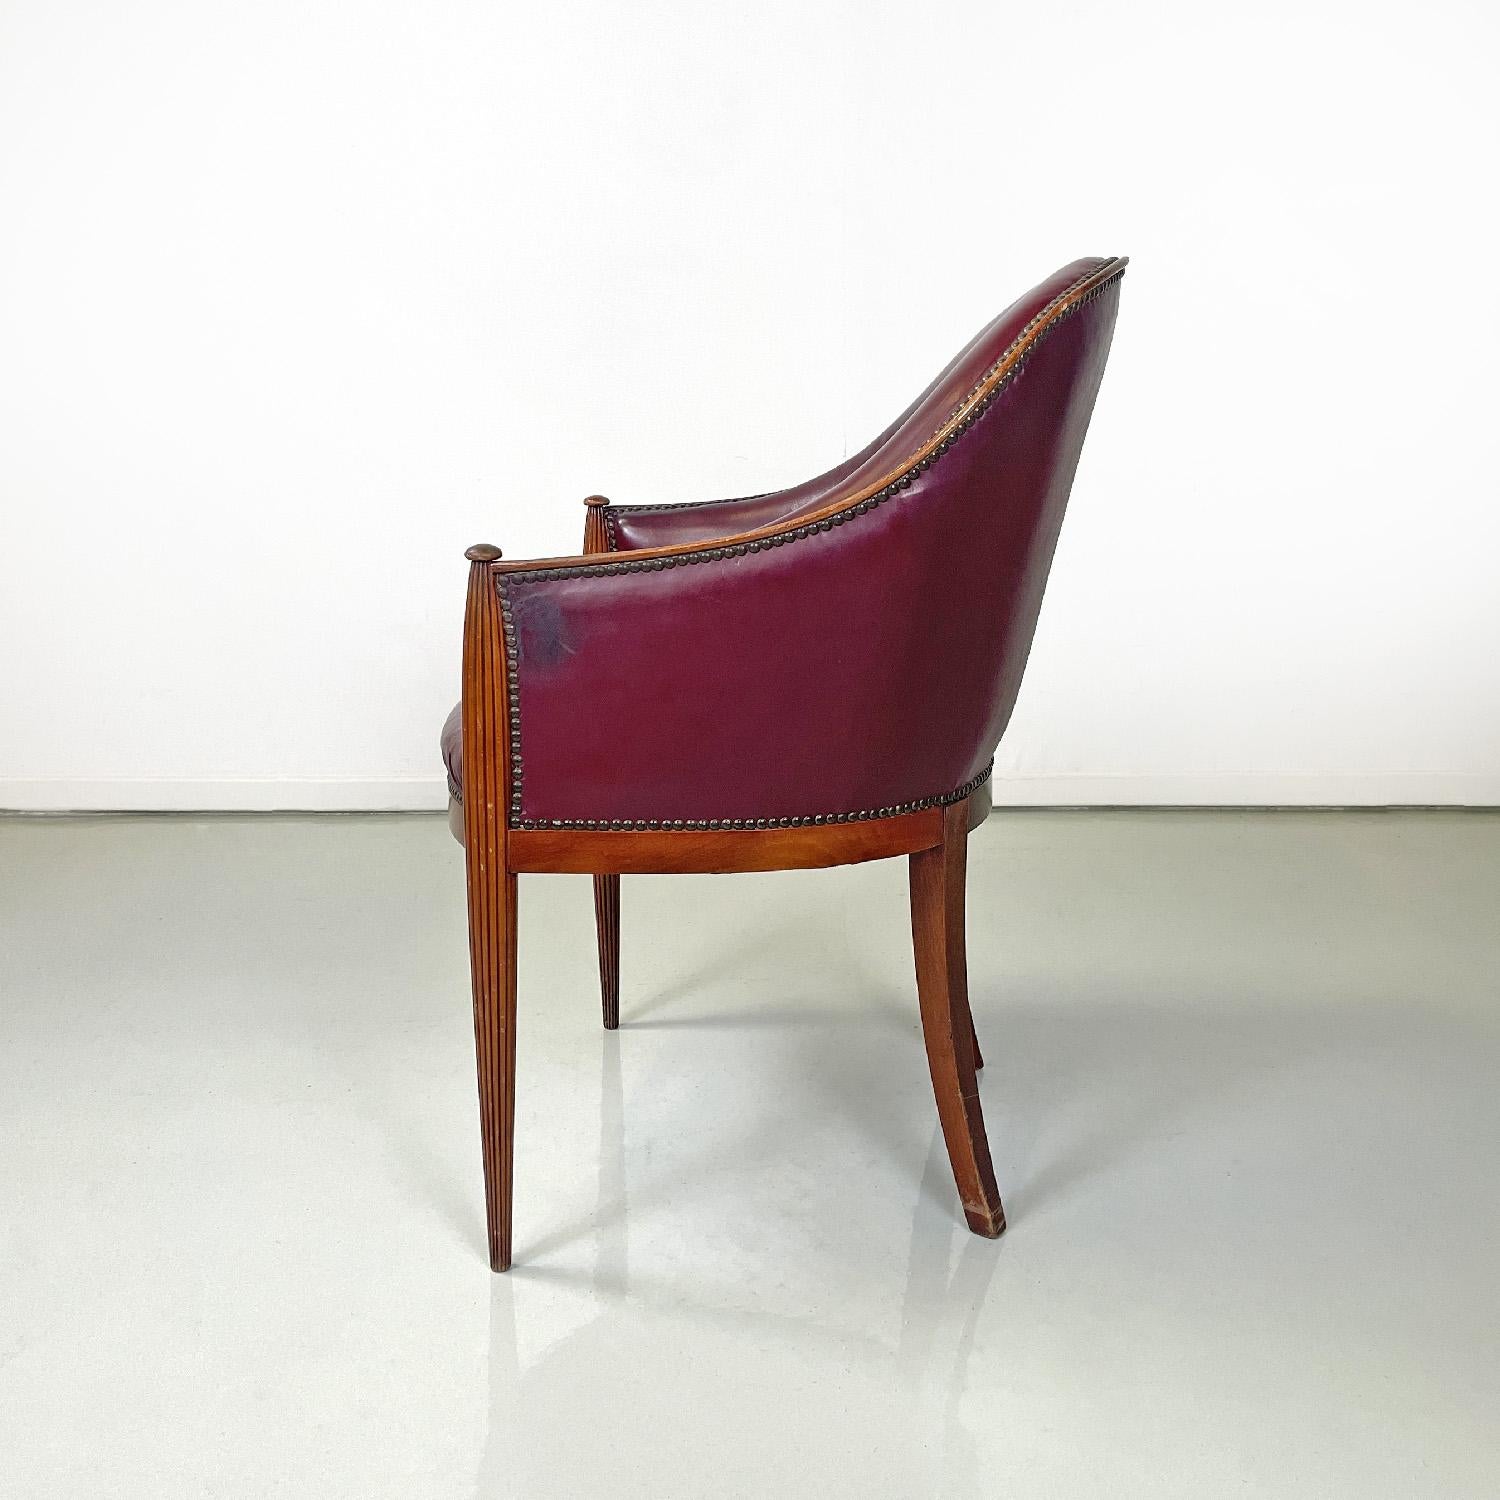 Italian mid-century modern wine-colored leather armchair with studs, 1950s
Tub armchair in wine red leather. The leather extends over the entire surface of the backrest and seat, even on the external part. The profiles of the armchair have bronze